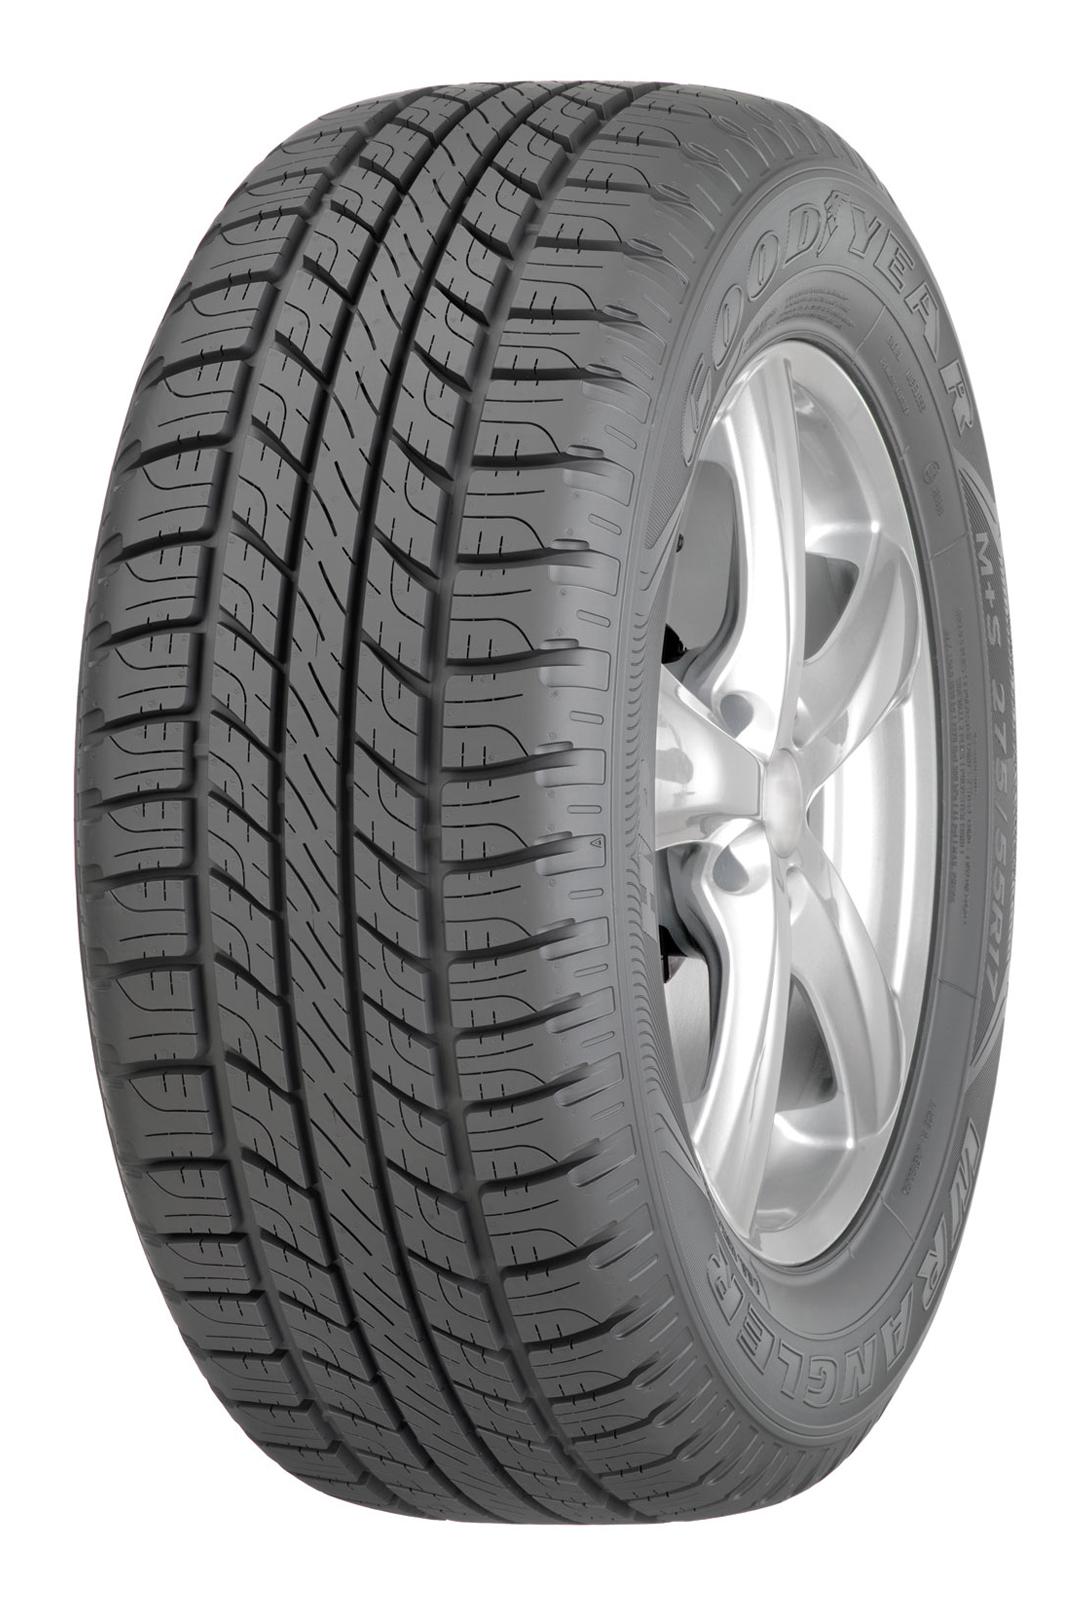 Goodyear WRANGLER HP ALL WEATHER 235/65 R17 WRL HP ALL WEATHER 104V FP M+S ., Rok výroby (DOT): 2021